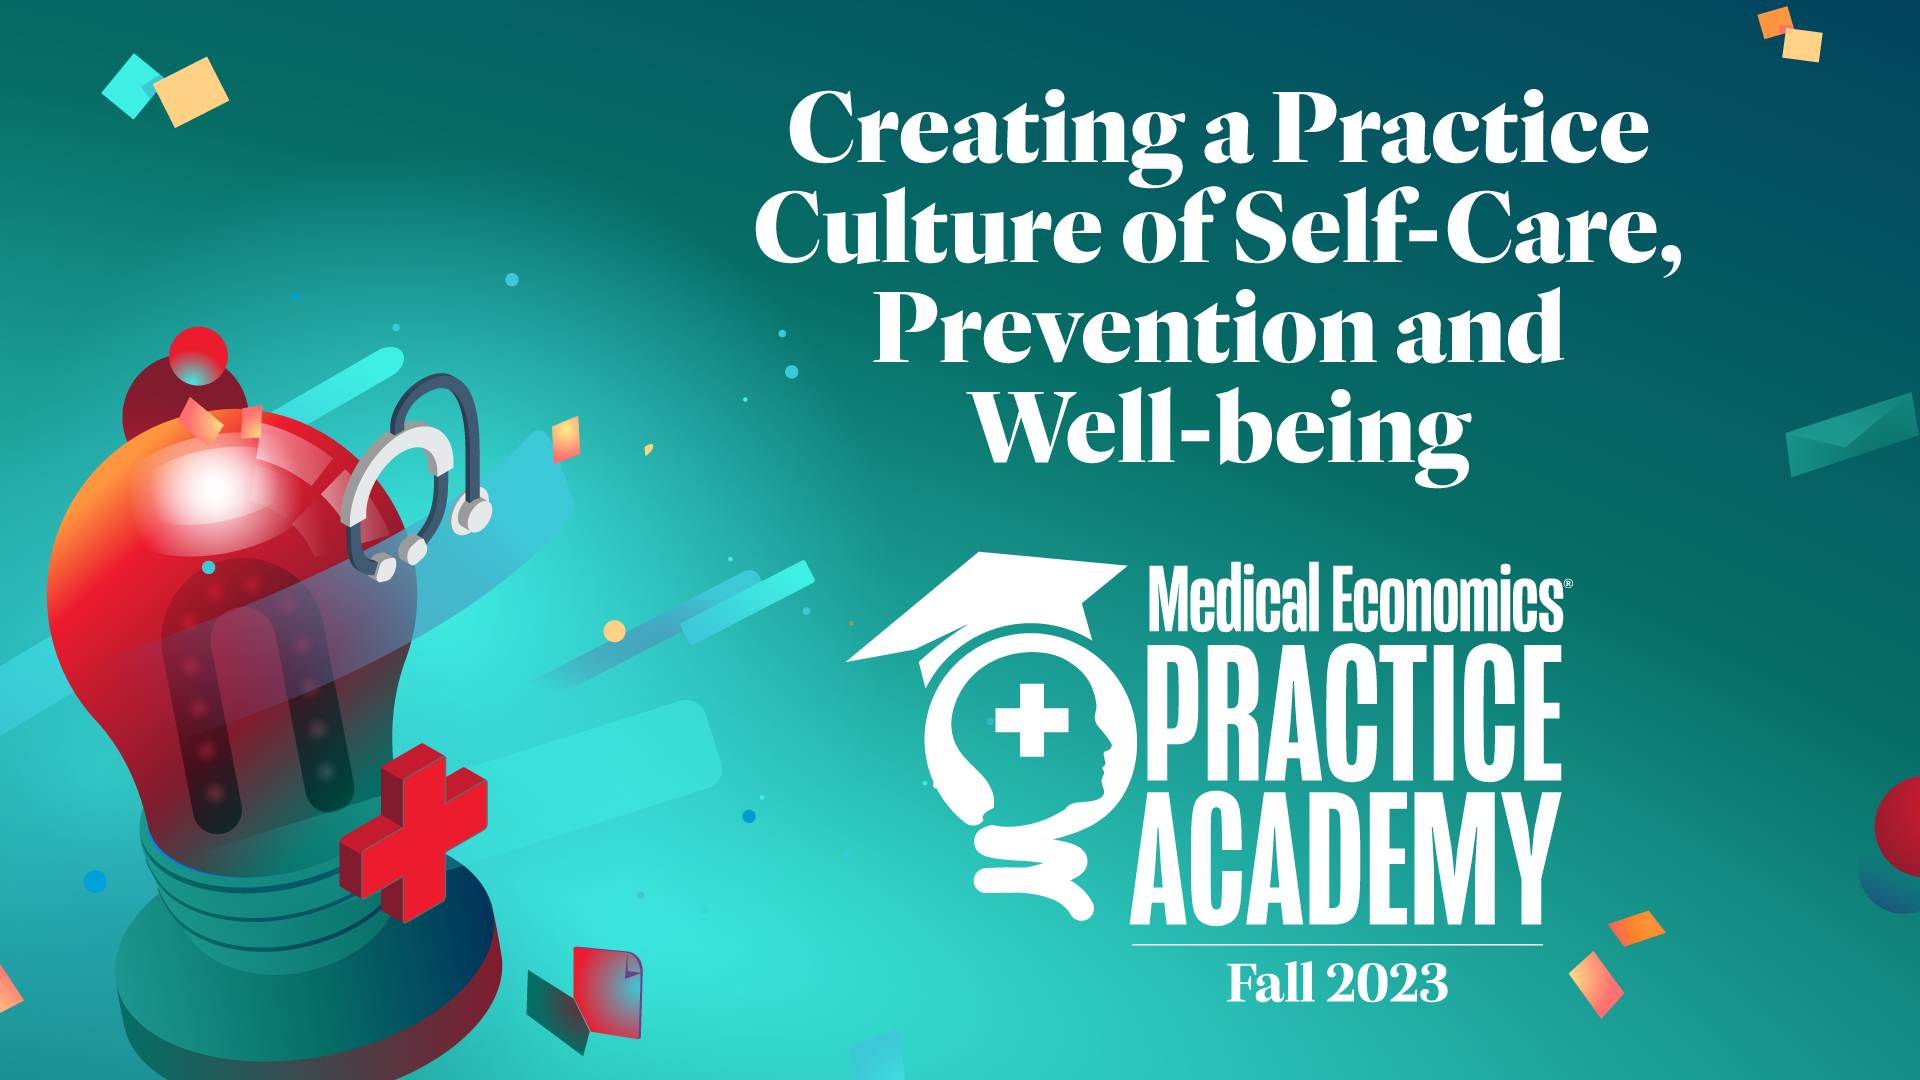 Creating a Practice Culture of Self-Care, Prevention and Well-being